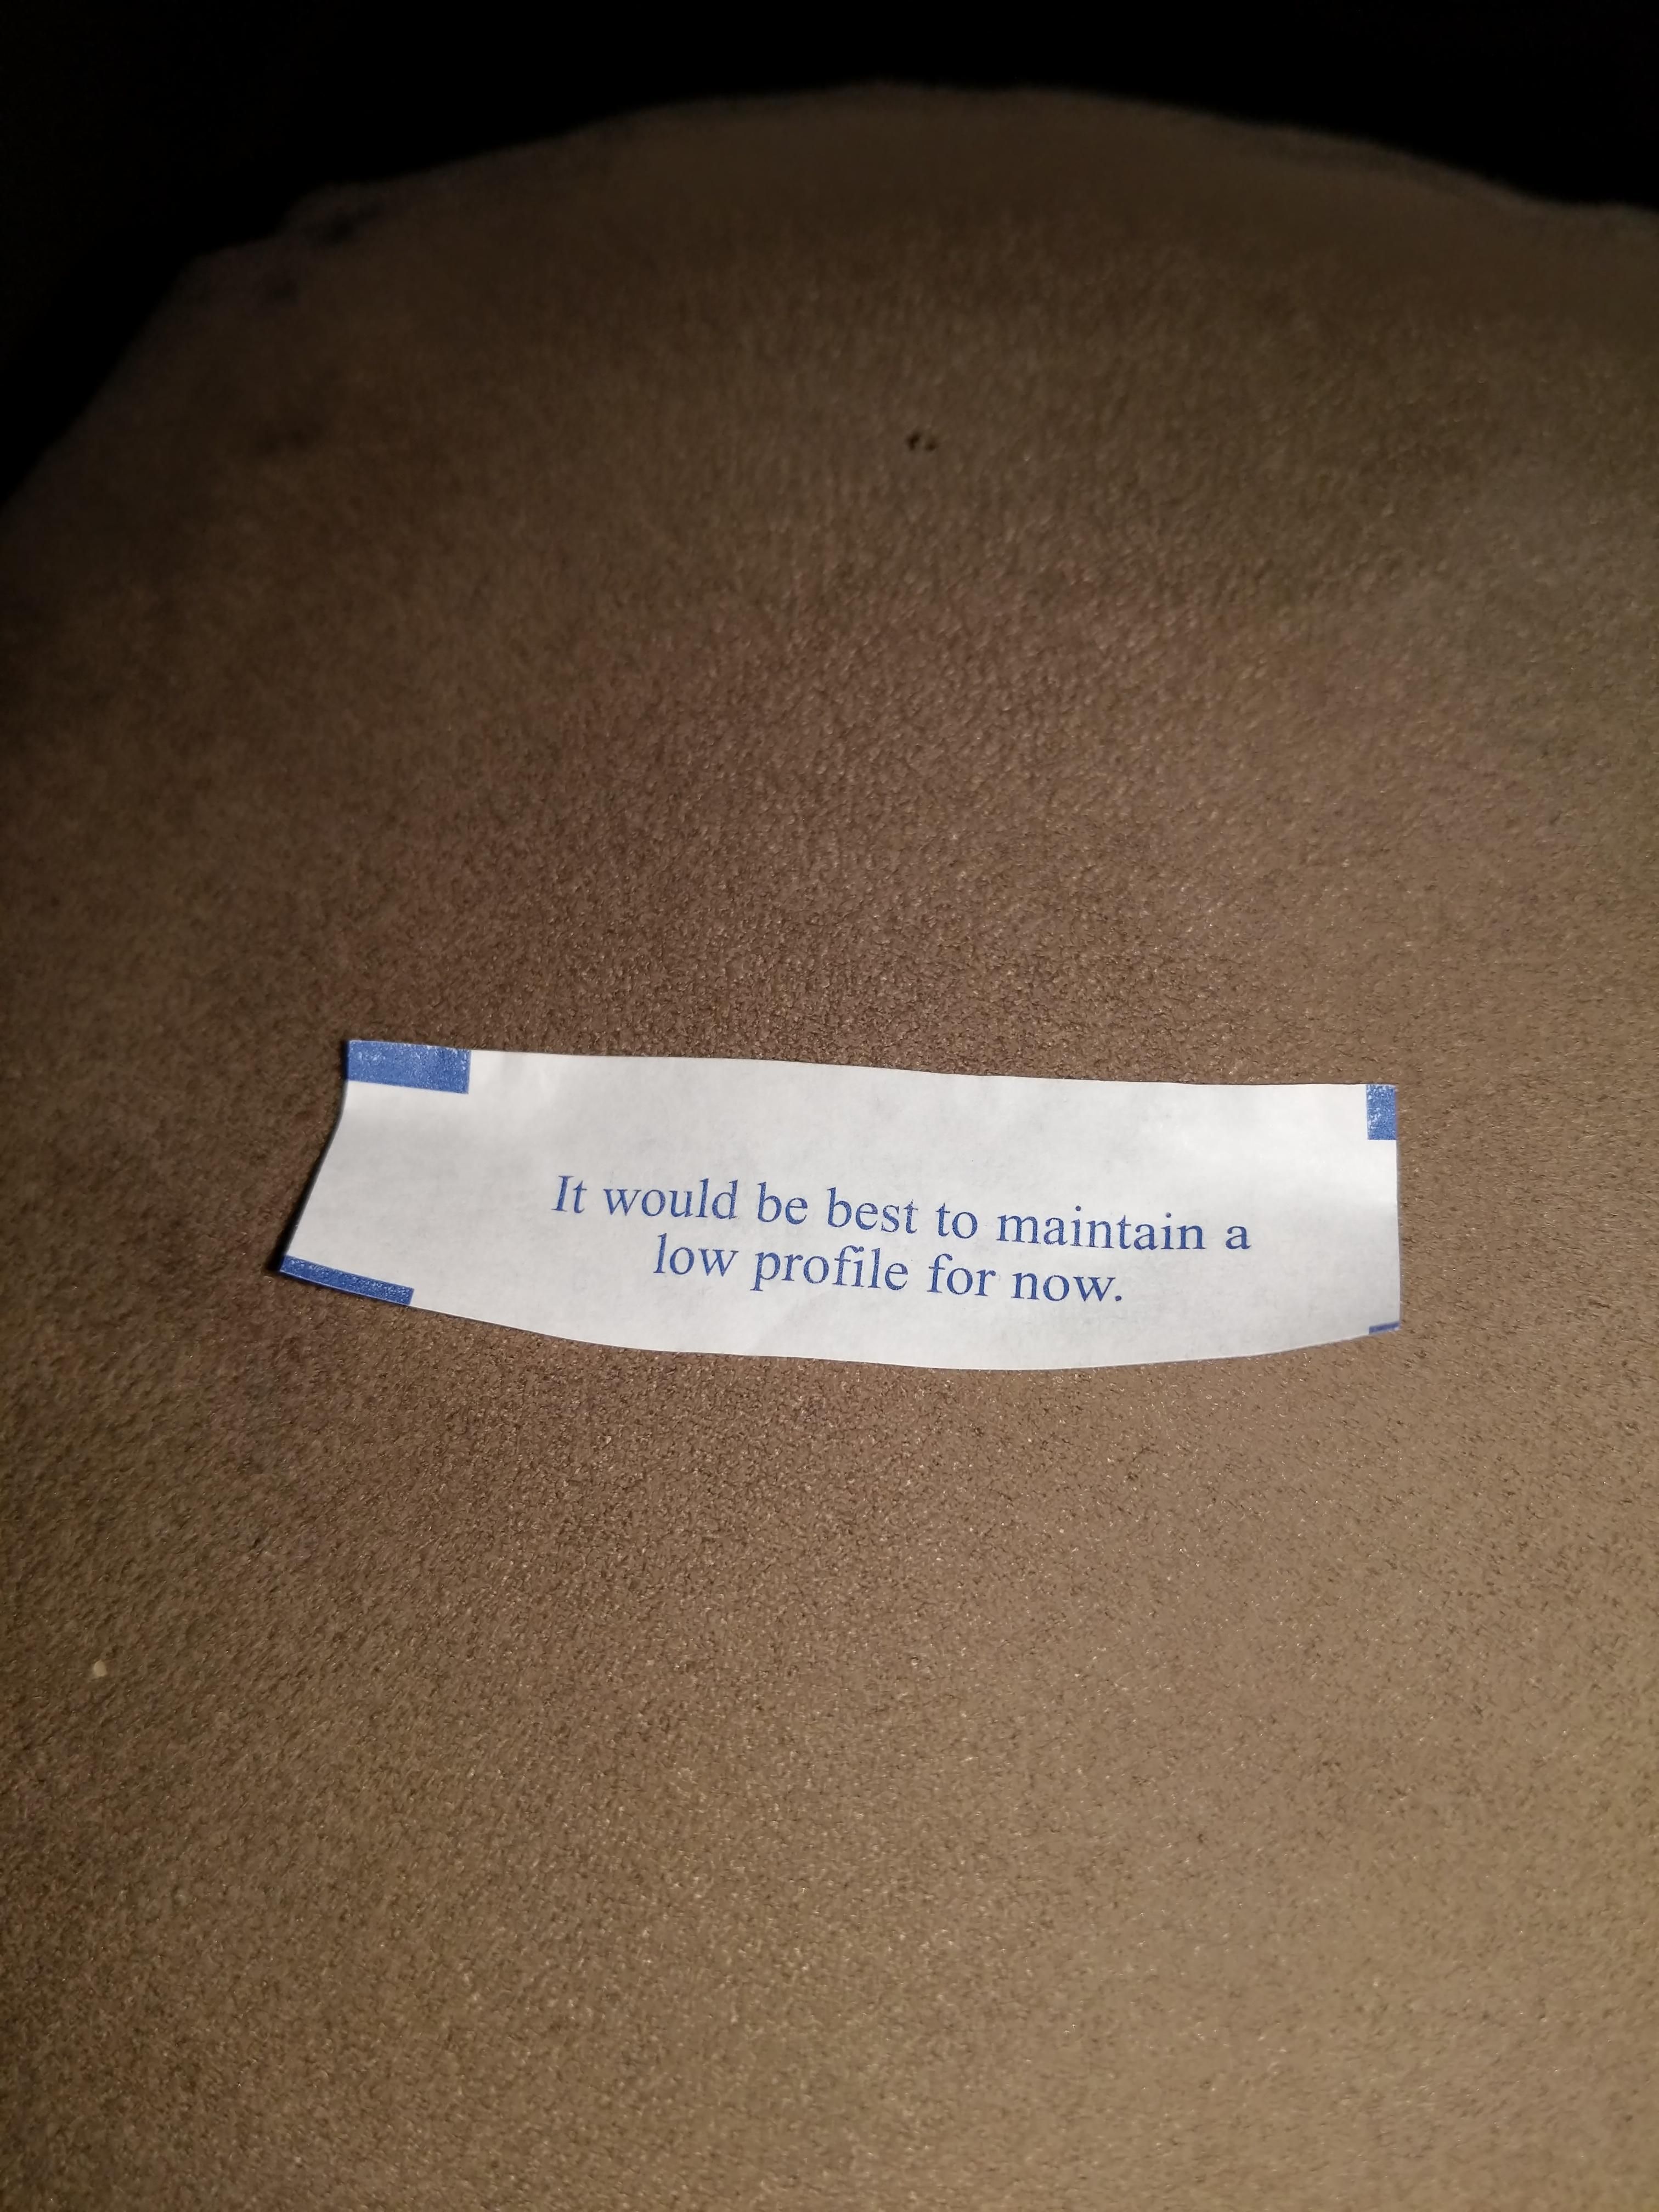 WTF fortune cookie!?!?